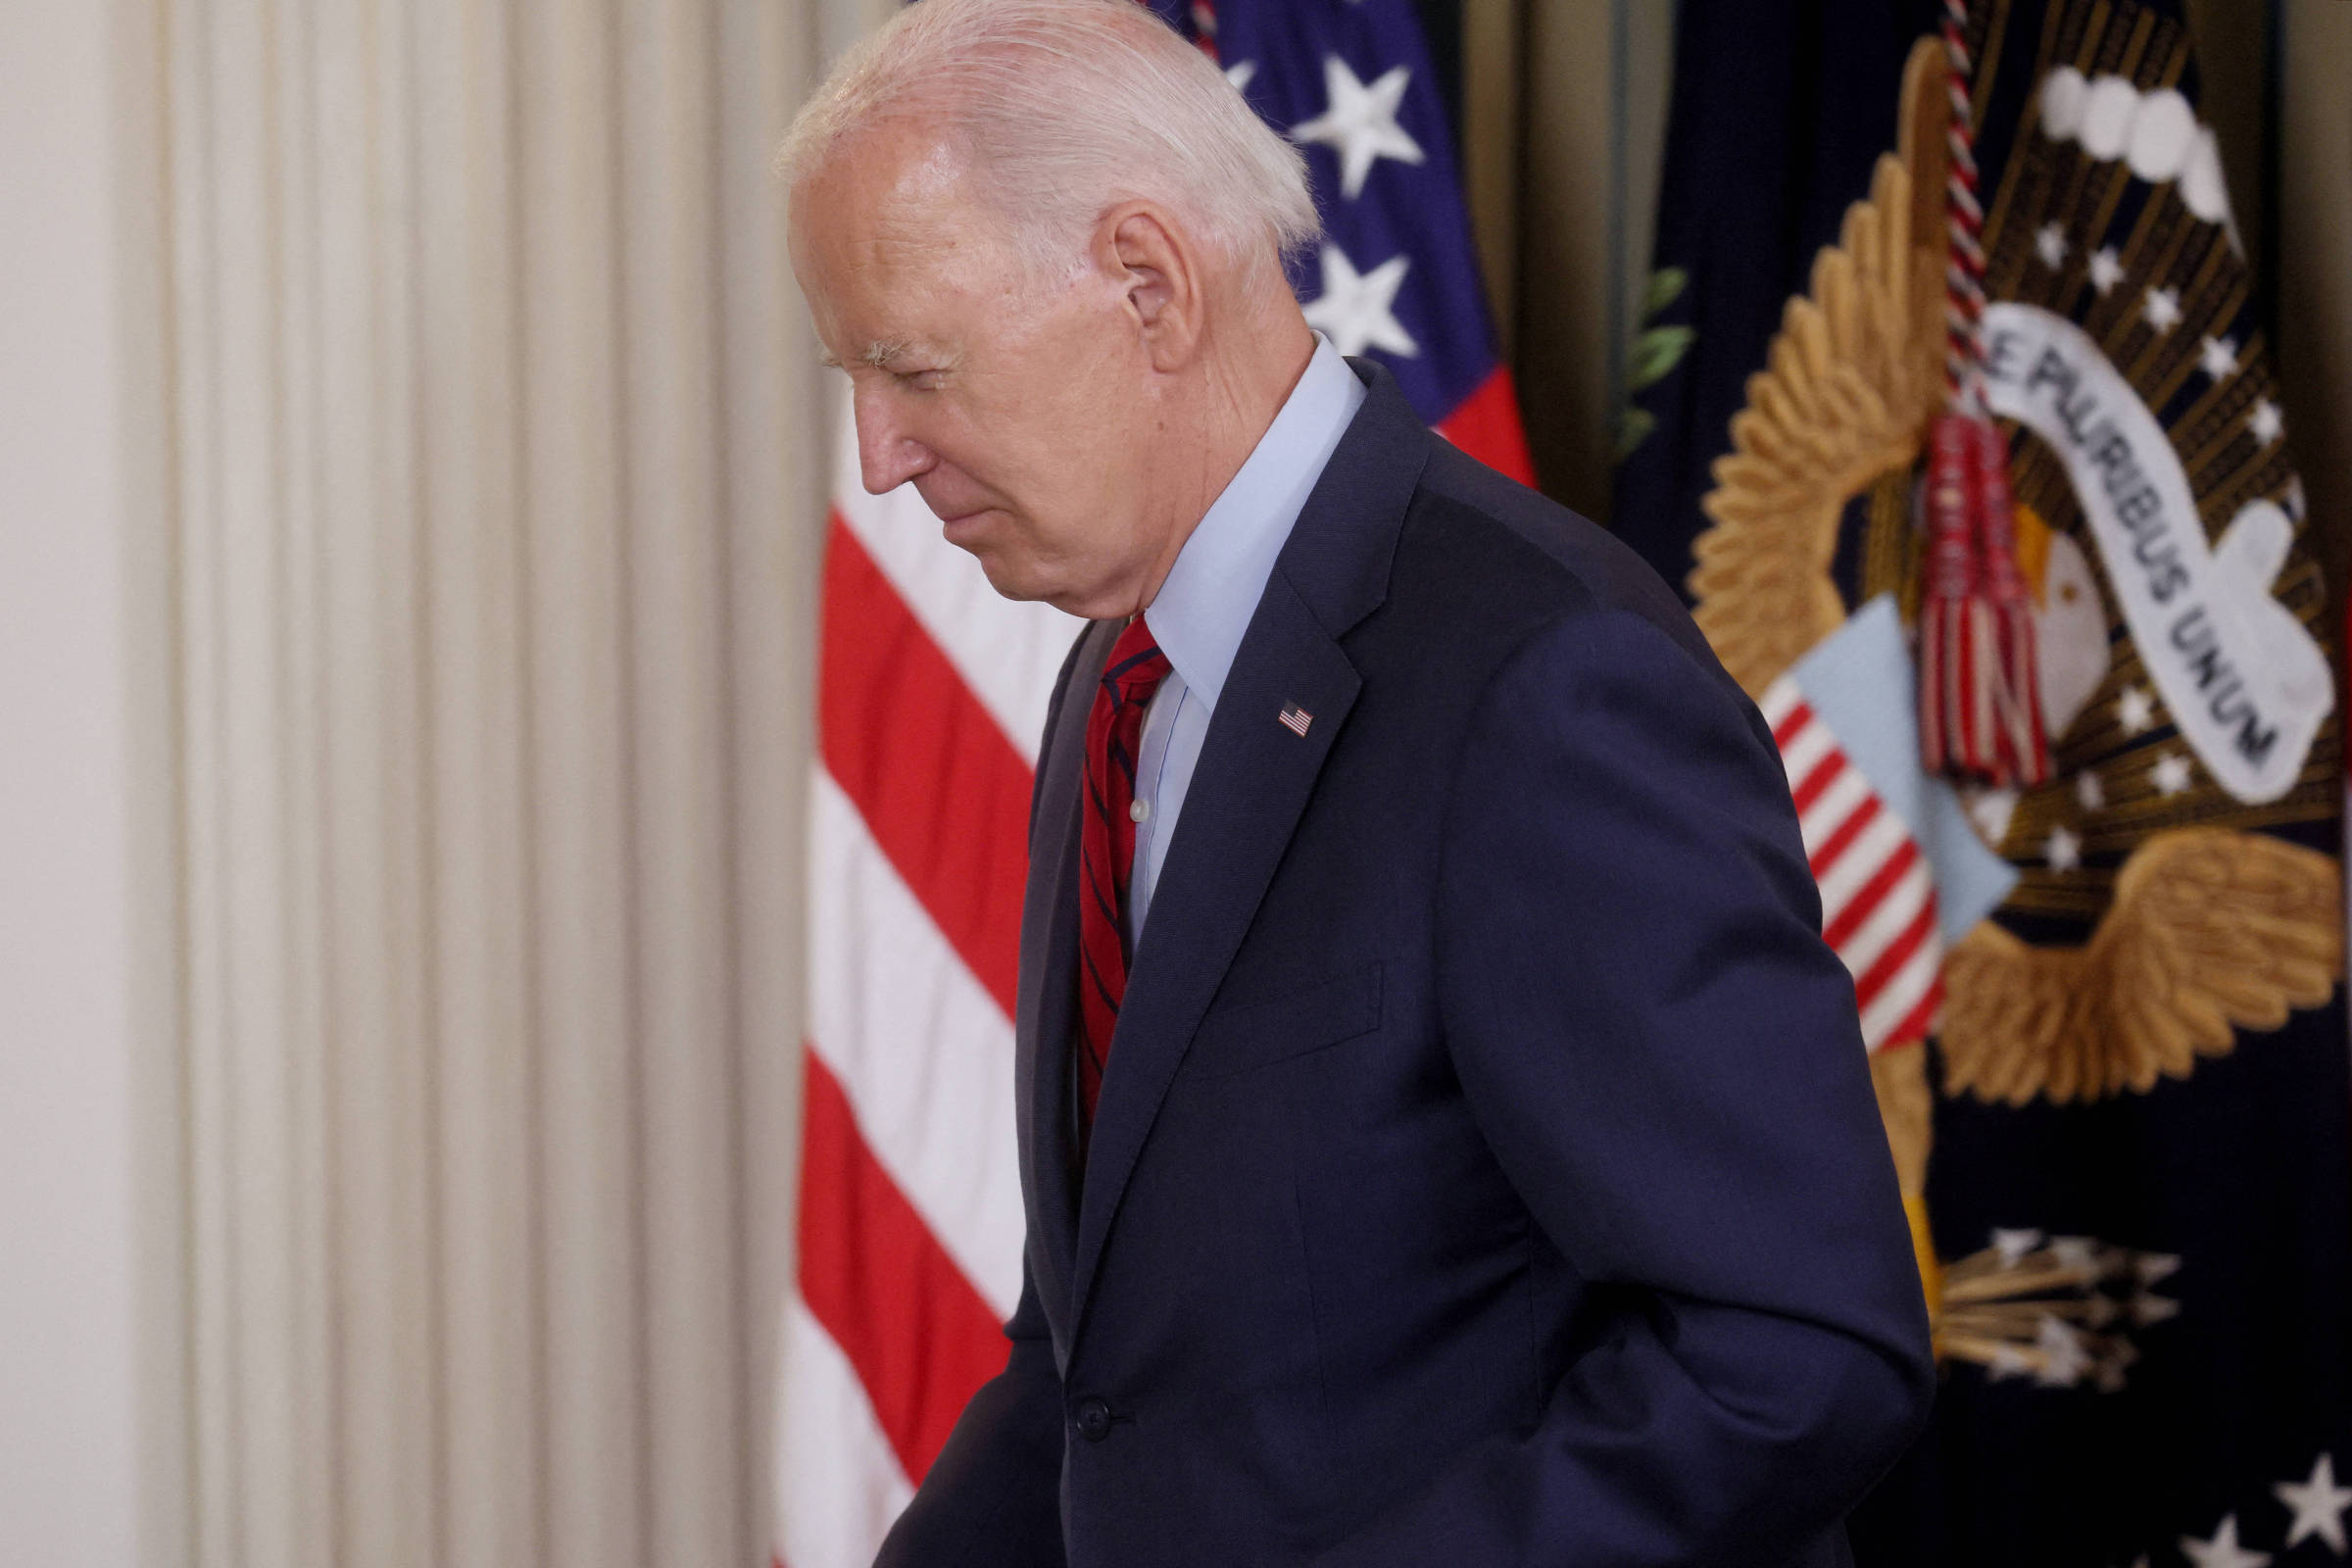 Opinion – Lúcia Guimarães: New book about Joe Biden defies expectations and brings revelations from the White House